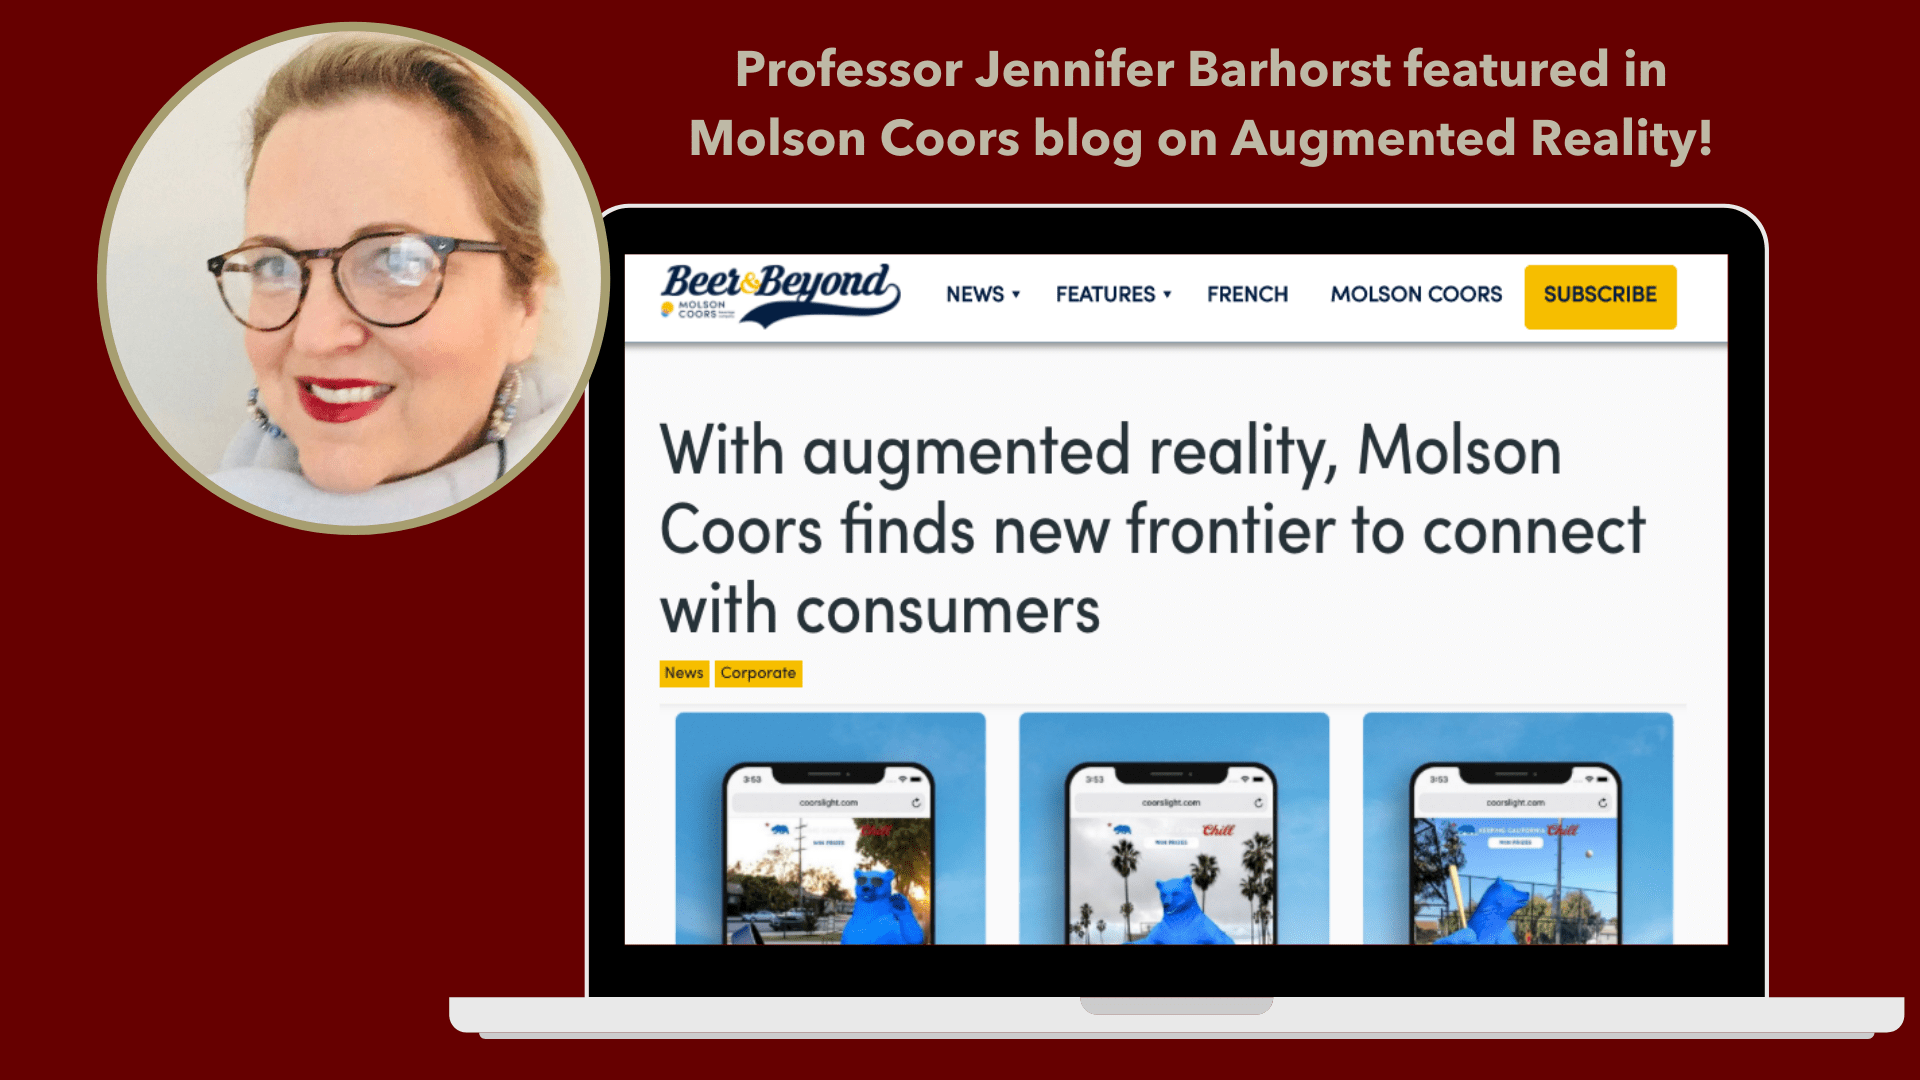 Professor Jennifer Barhorst Shares Augmented Reality Insights with Molson Coors Beverage Company